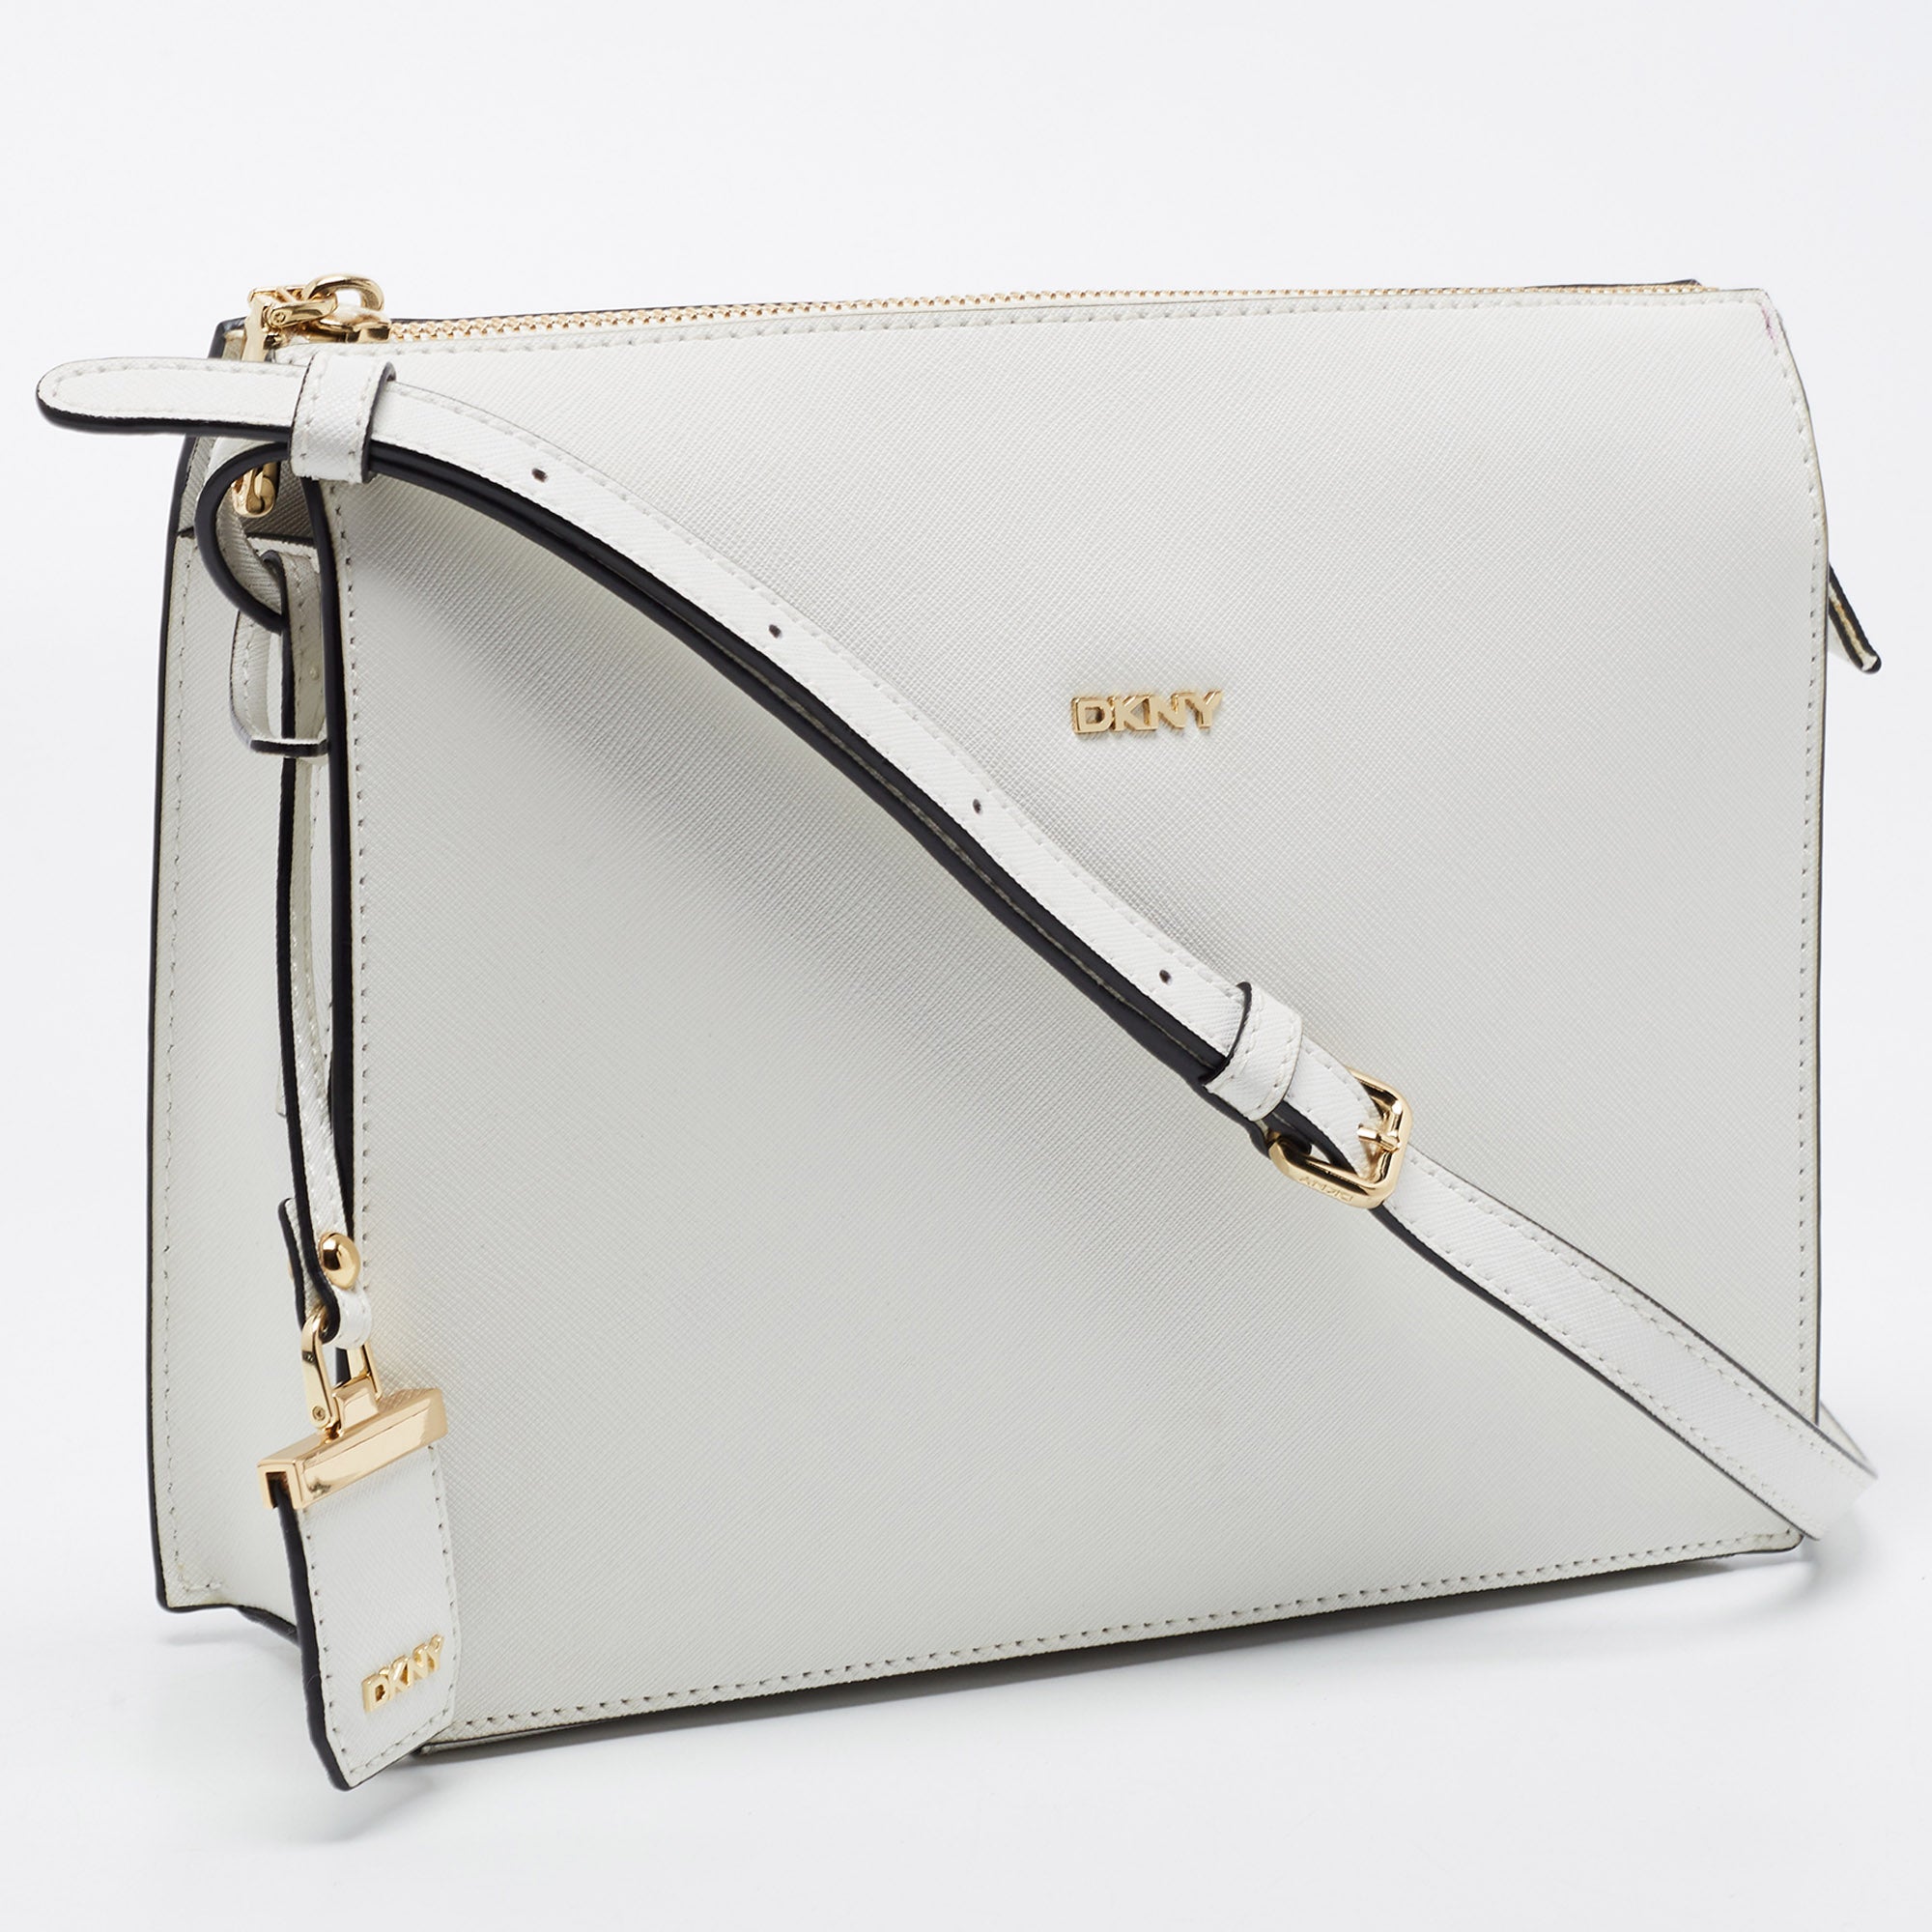 DKNY Patricia Tote White / Gold | Buy bags, purses & accessories online |  modeherz